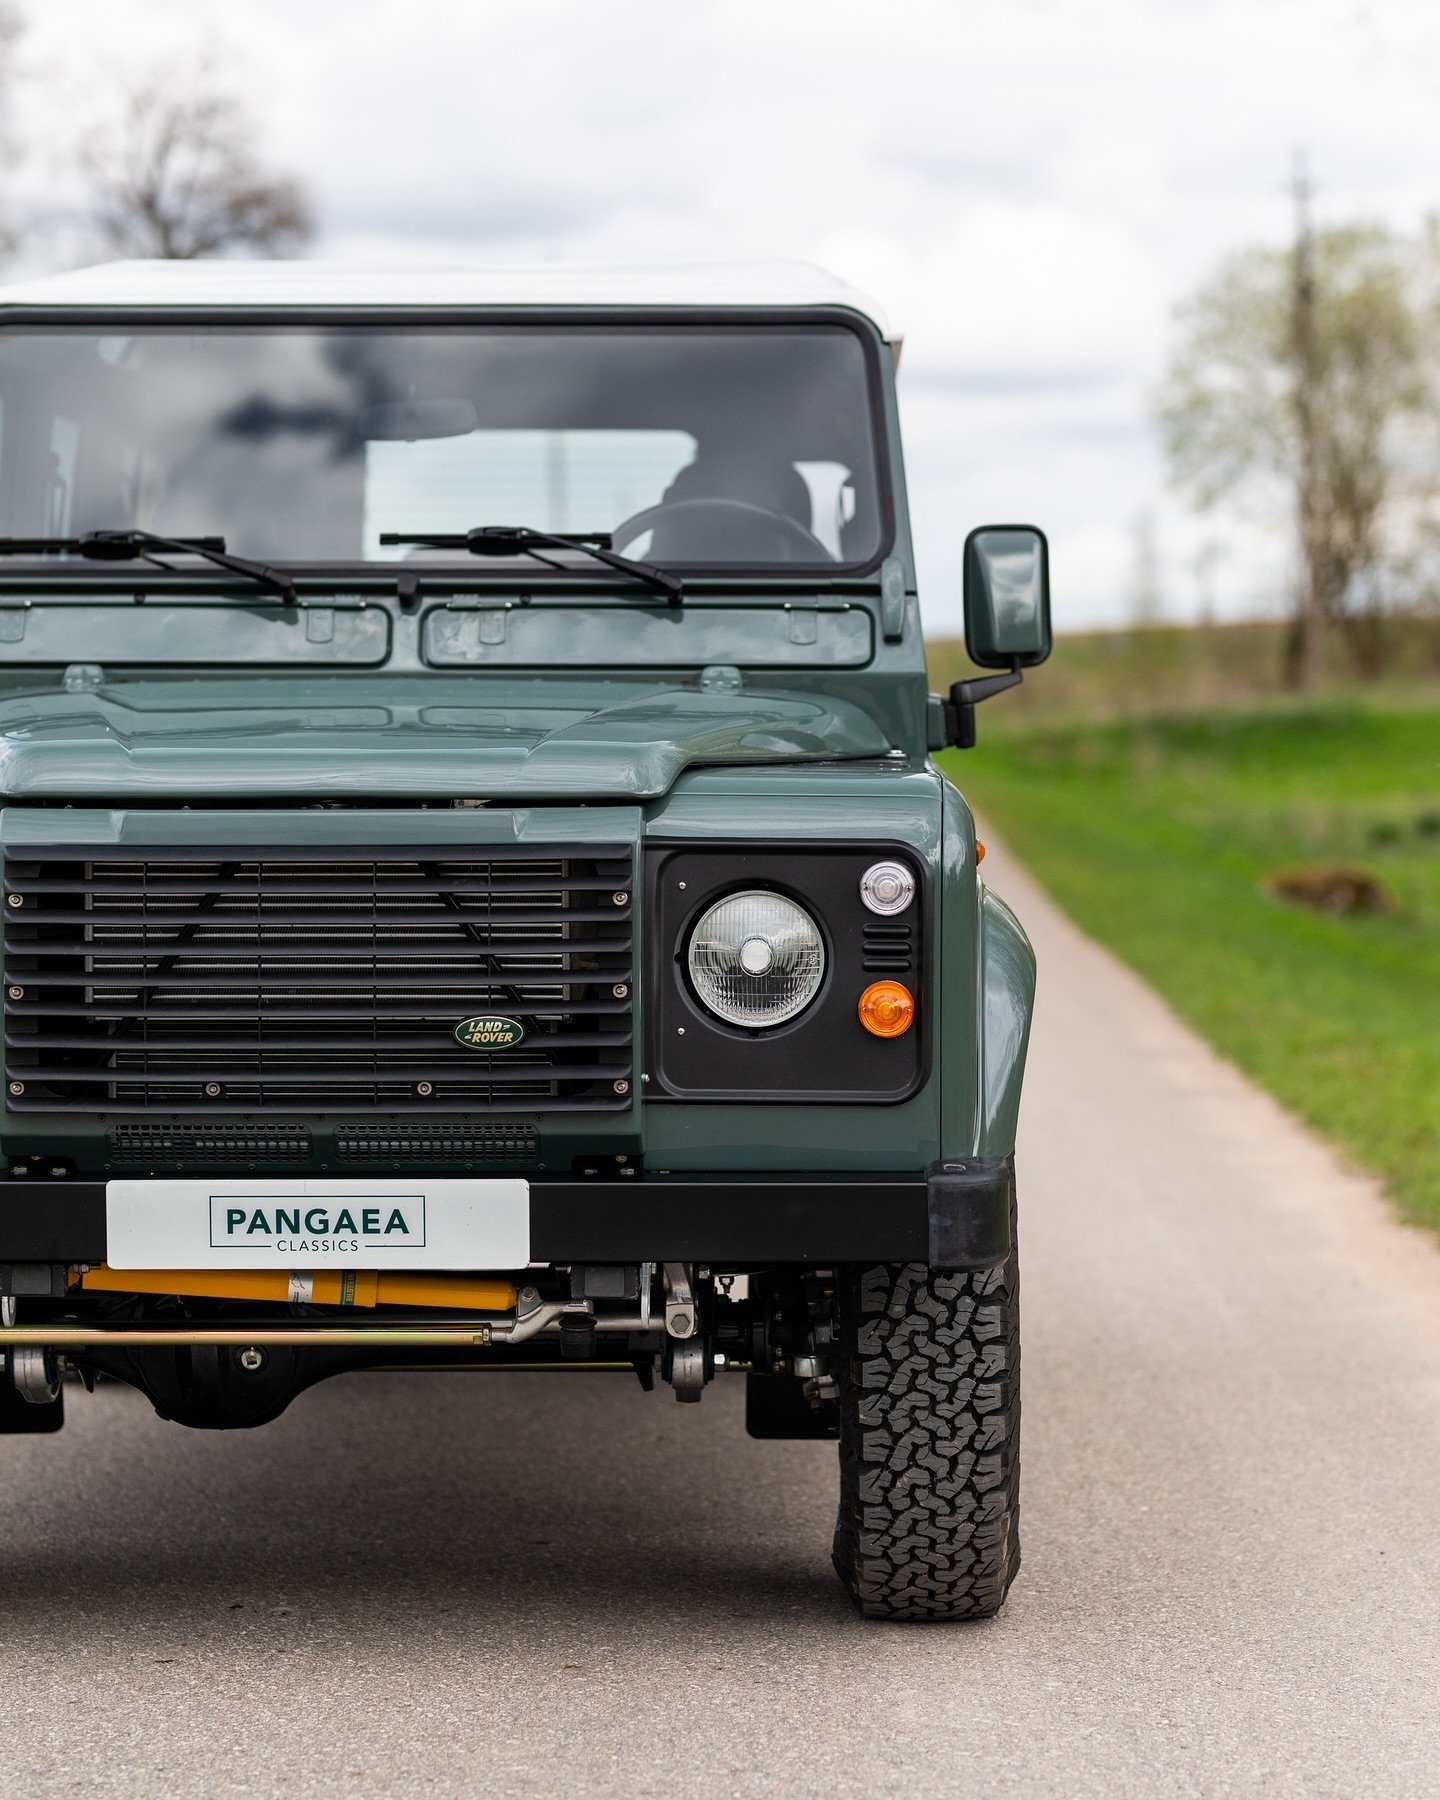 Sometimes, Less is More. 

1998 Land Rover Defender 110 - Td5 
Finished in Keswick Green with a Denim Twill Interior. 

#landroverdefender #defender #landroverdefender90 #landroverdefender110 #defender90 #customdefender #defenderrestoration #Defender